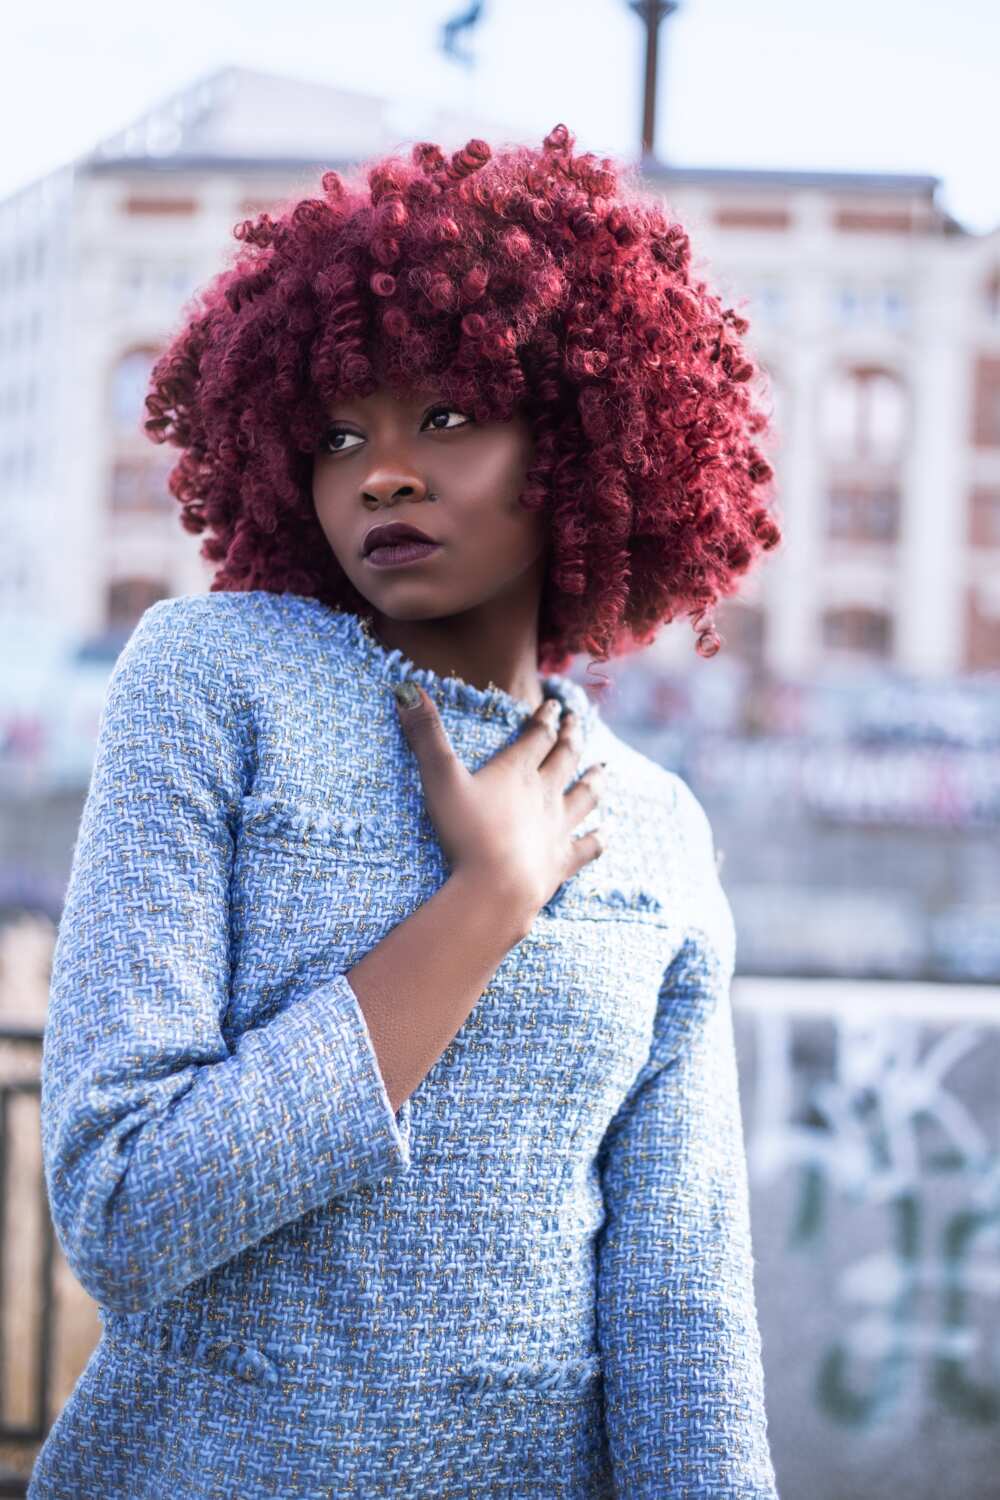 Top 50 burgundy hair styles to try in 2019 